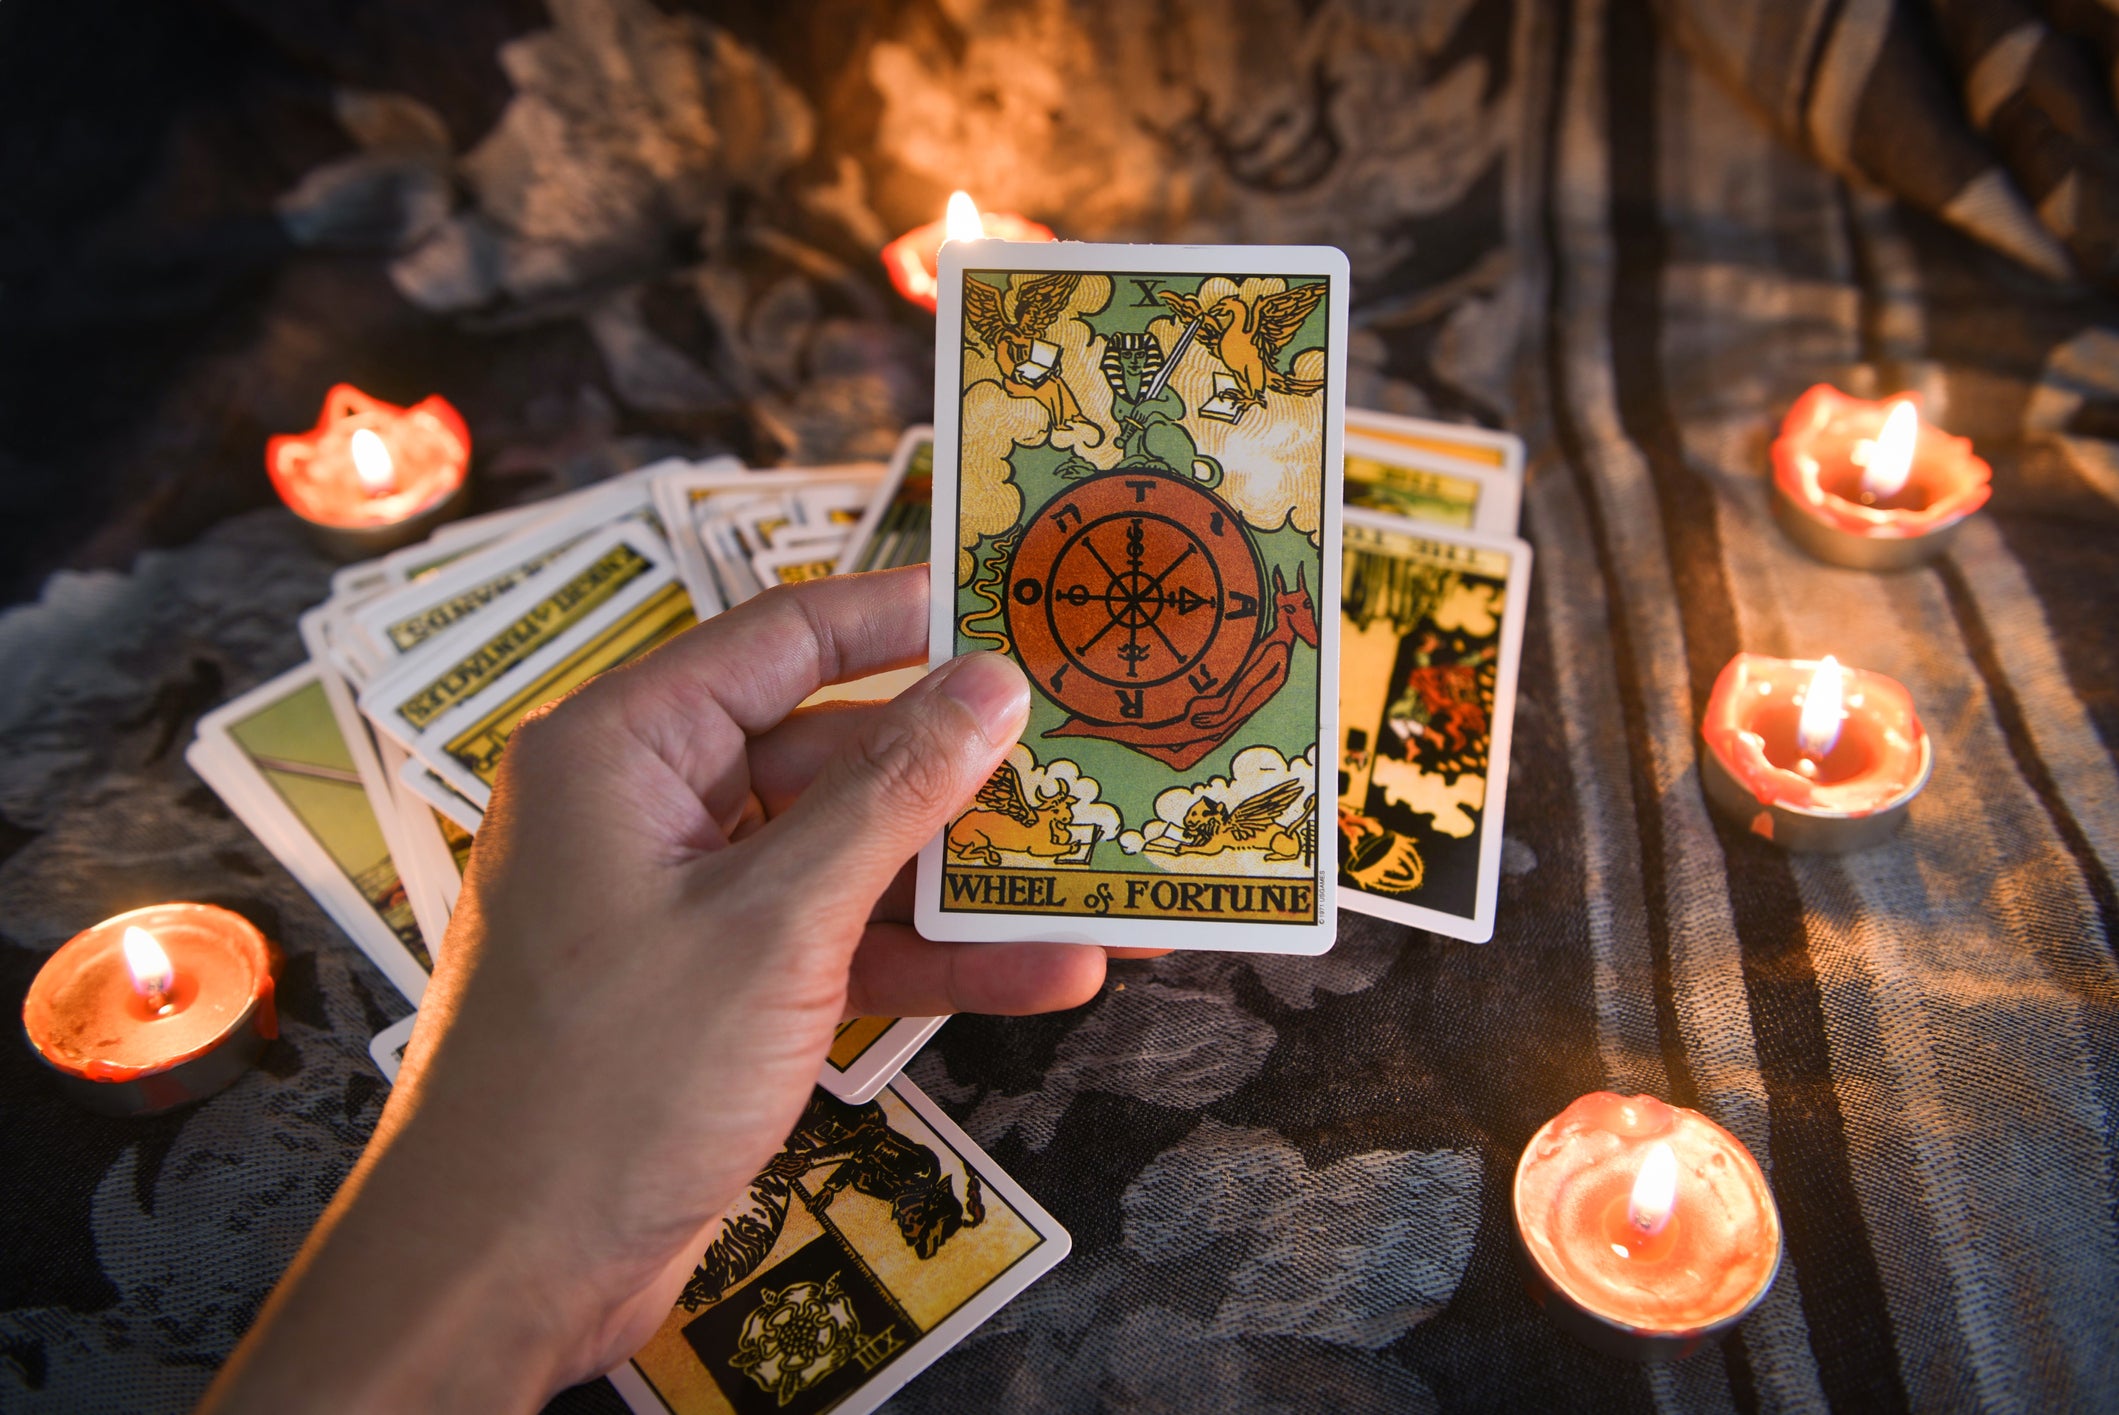 Tarot decks have been reimagined many times with different styles and themes